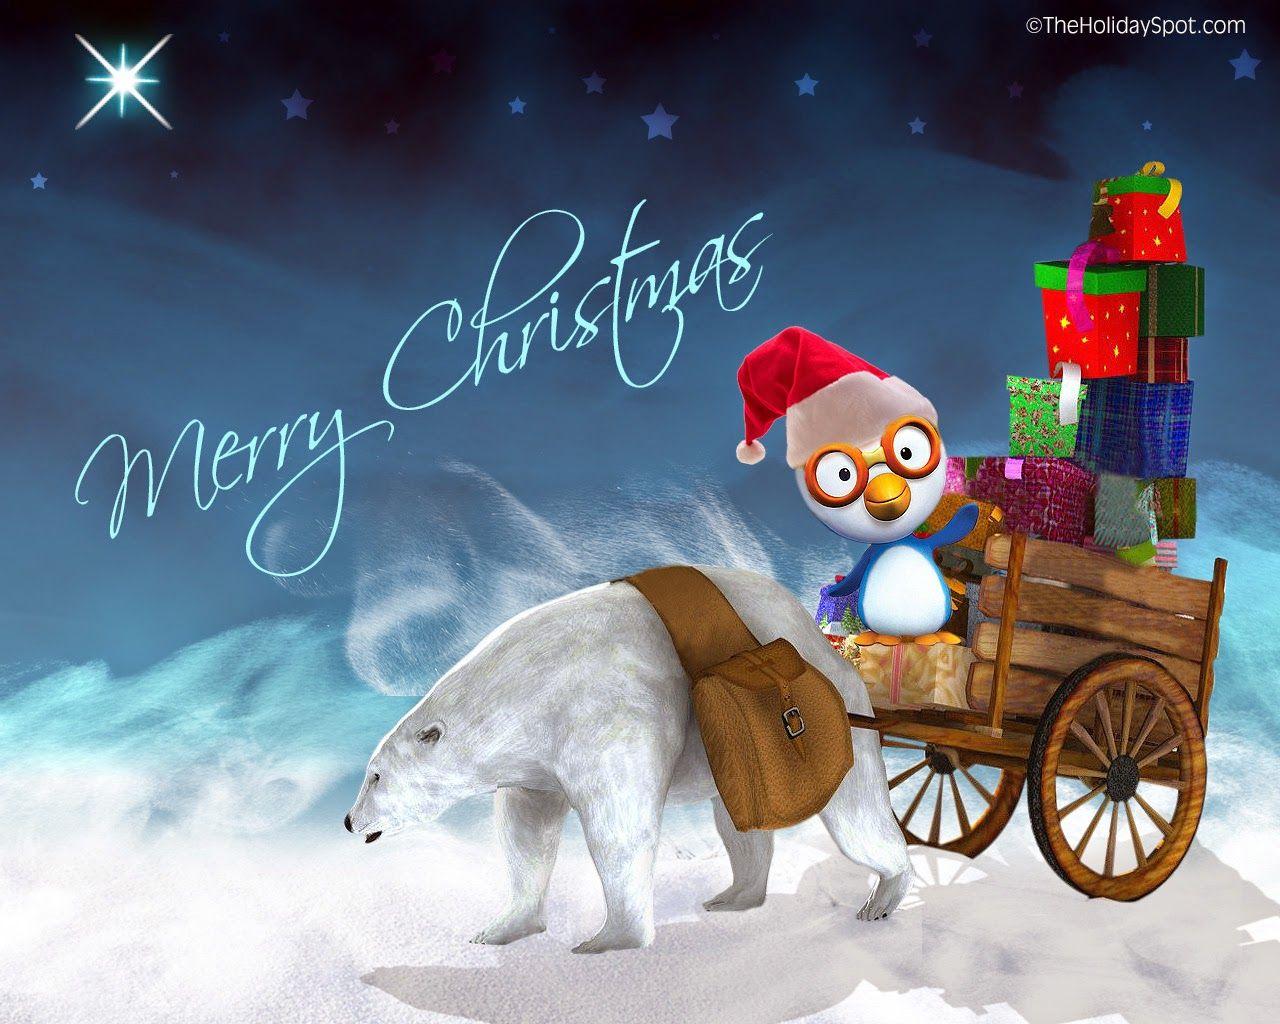 Be Happy Christmas day Wording Wallpaper Image Photo full HD